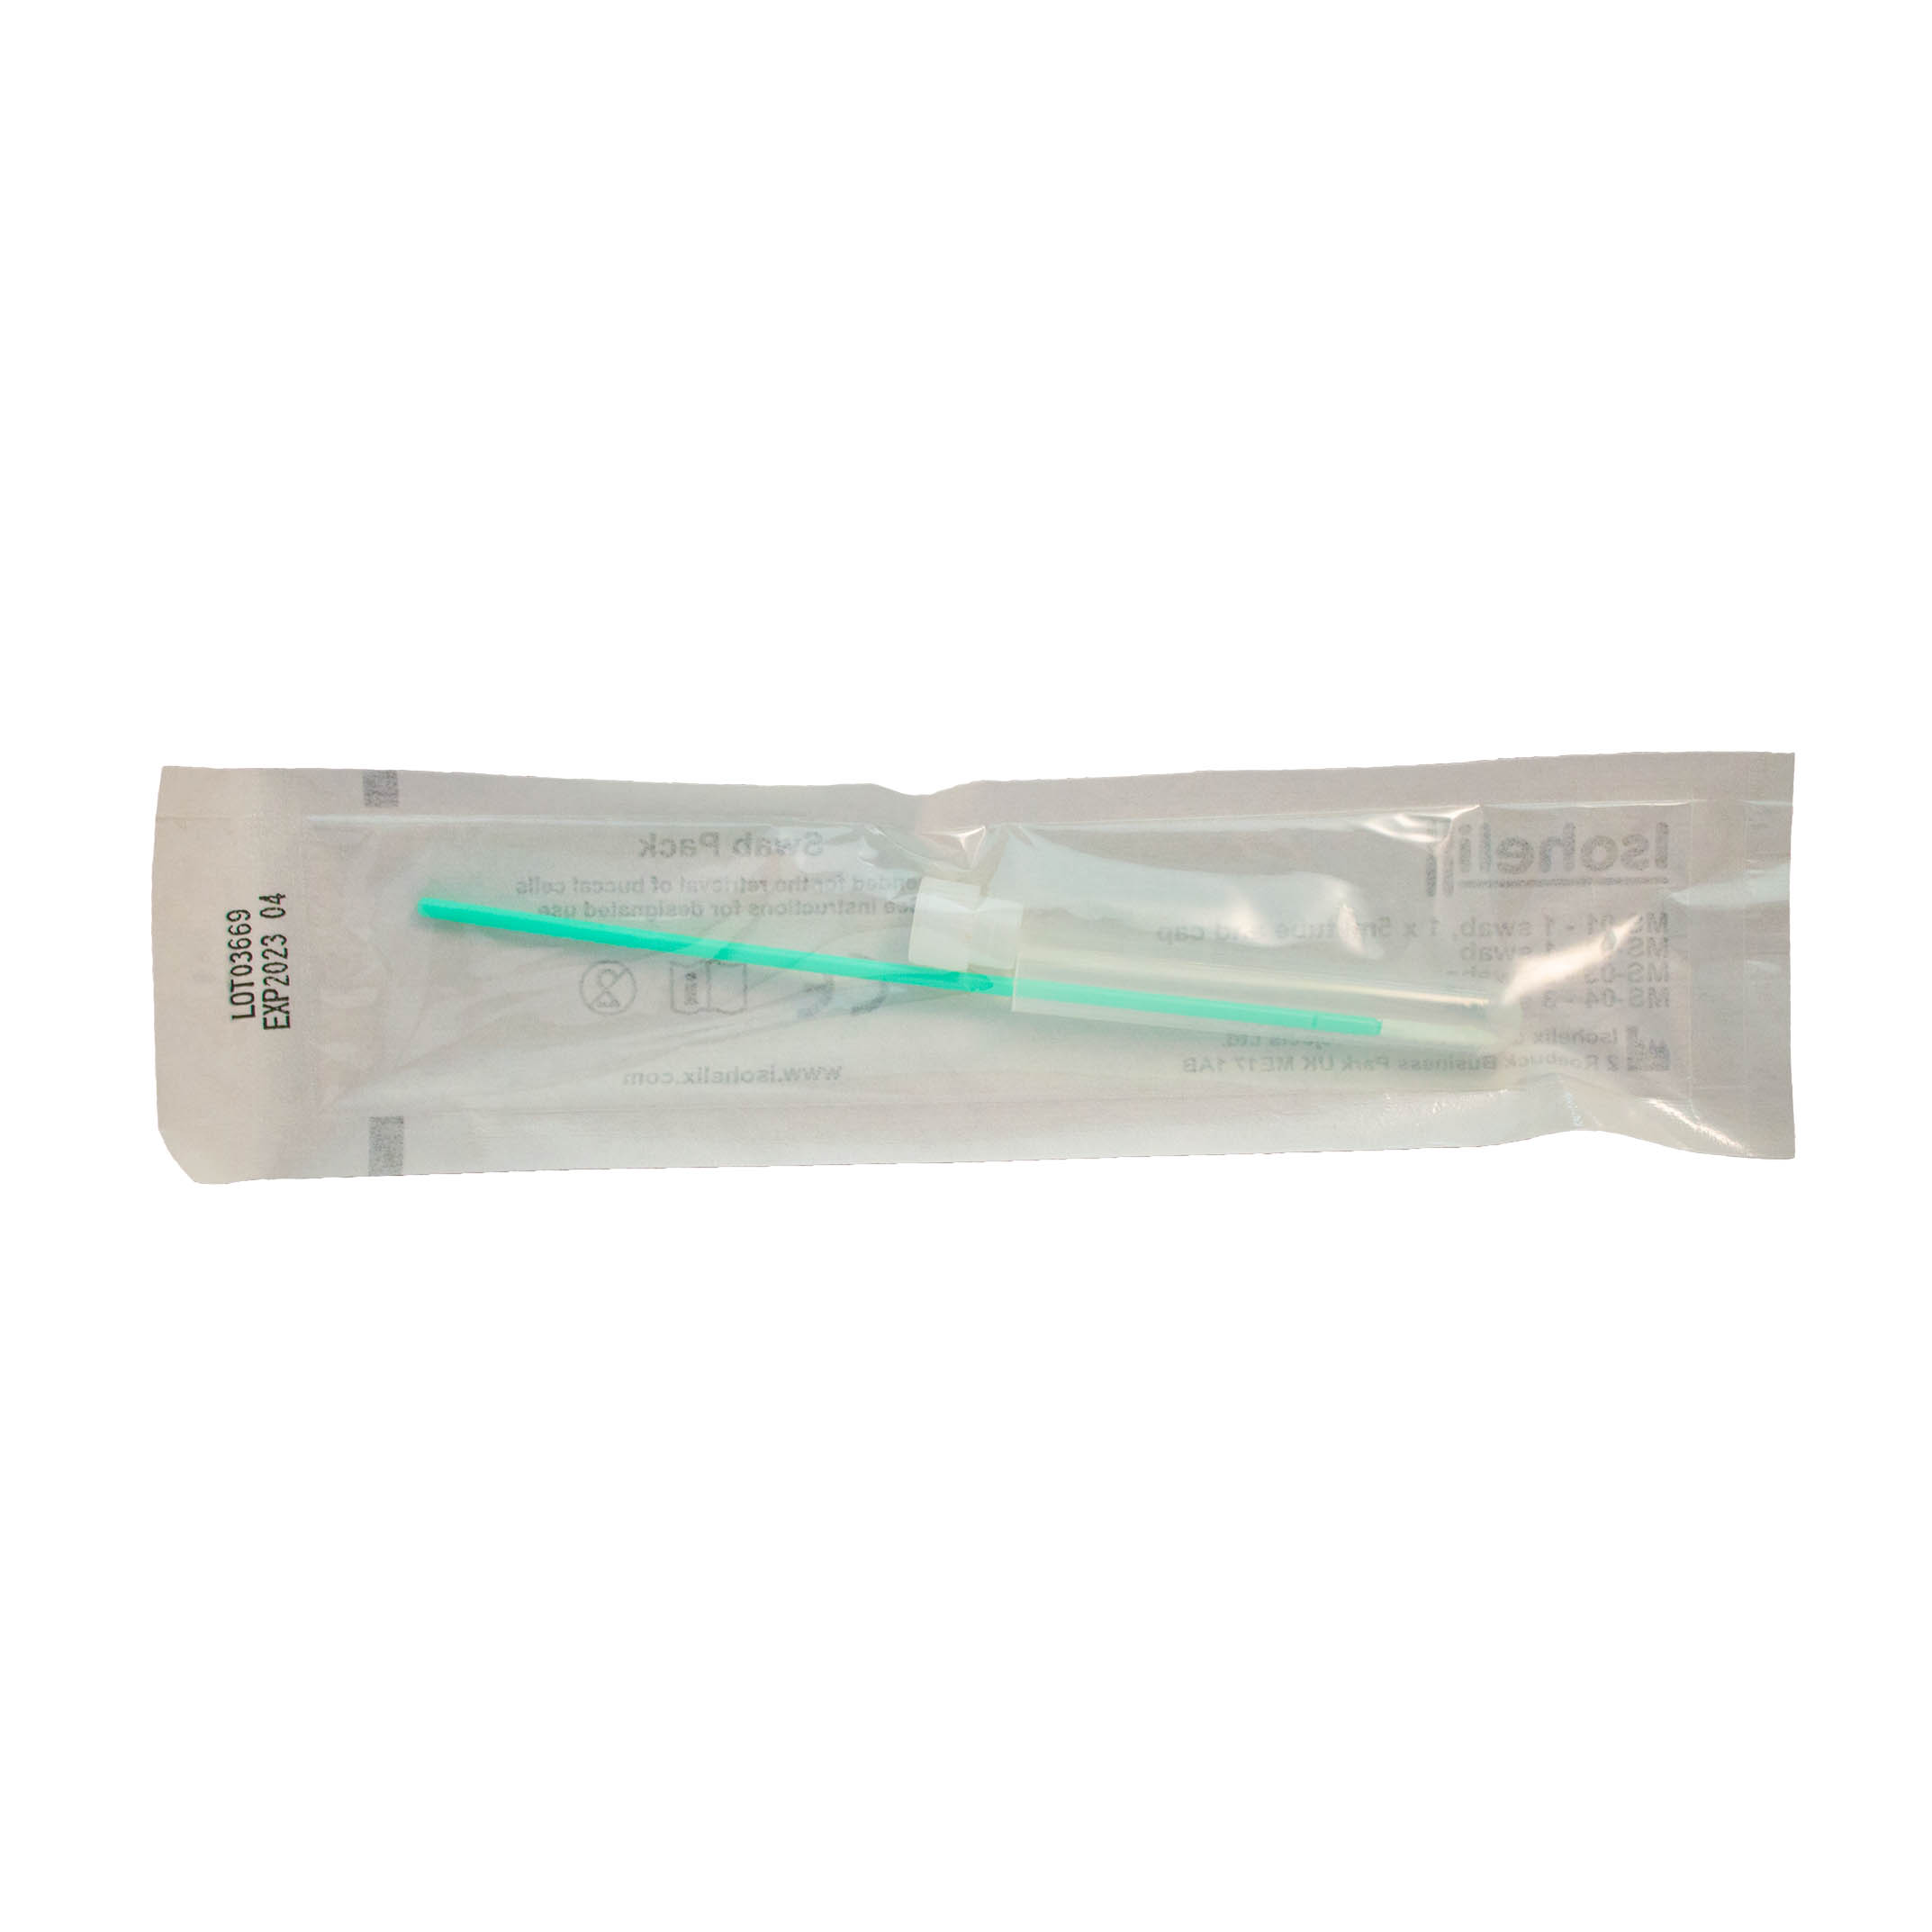 DNA/RNA Buccal Mouse Swab